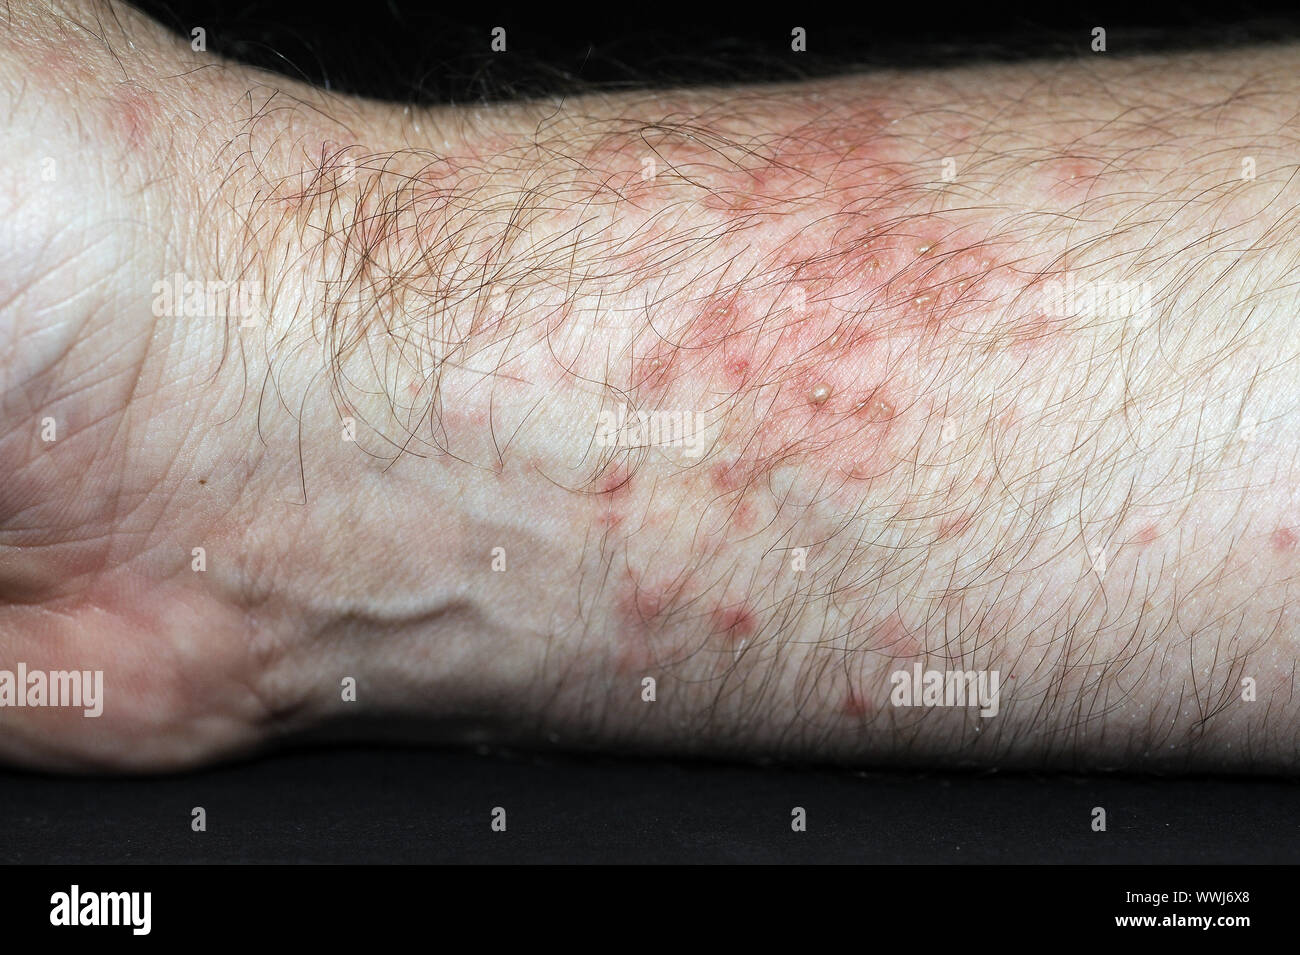 Strongly red, blistered skin after netting with sea anemones, Heteractis spec. Stock Photo